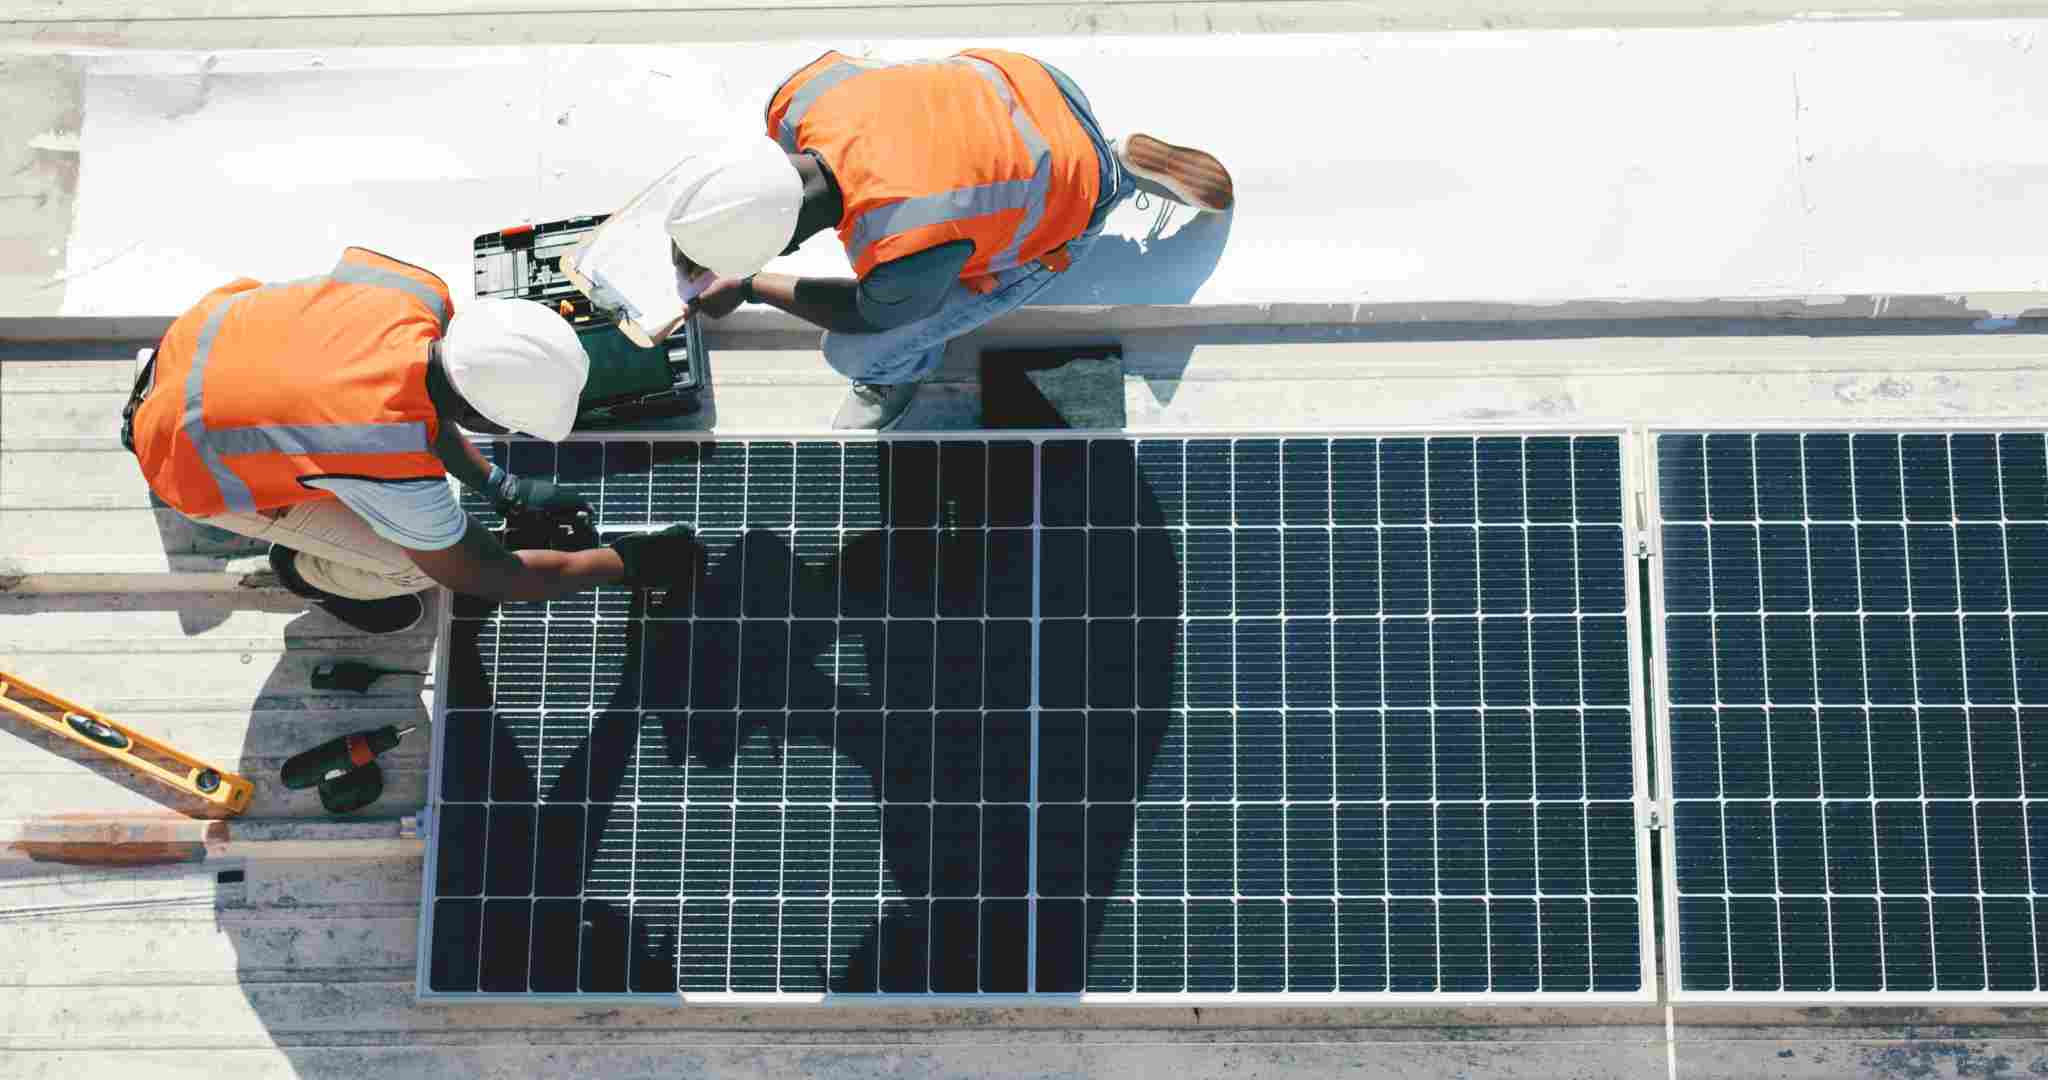 Image of roof work on solar panels